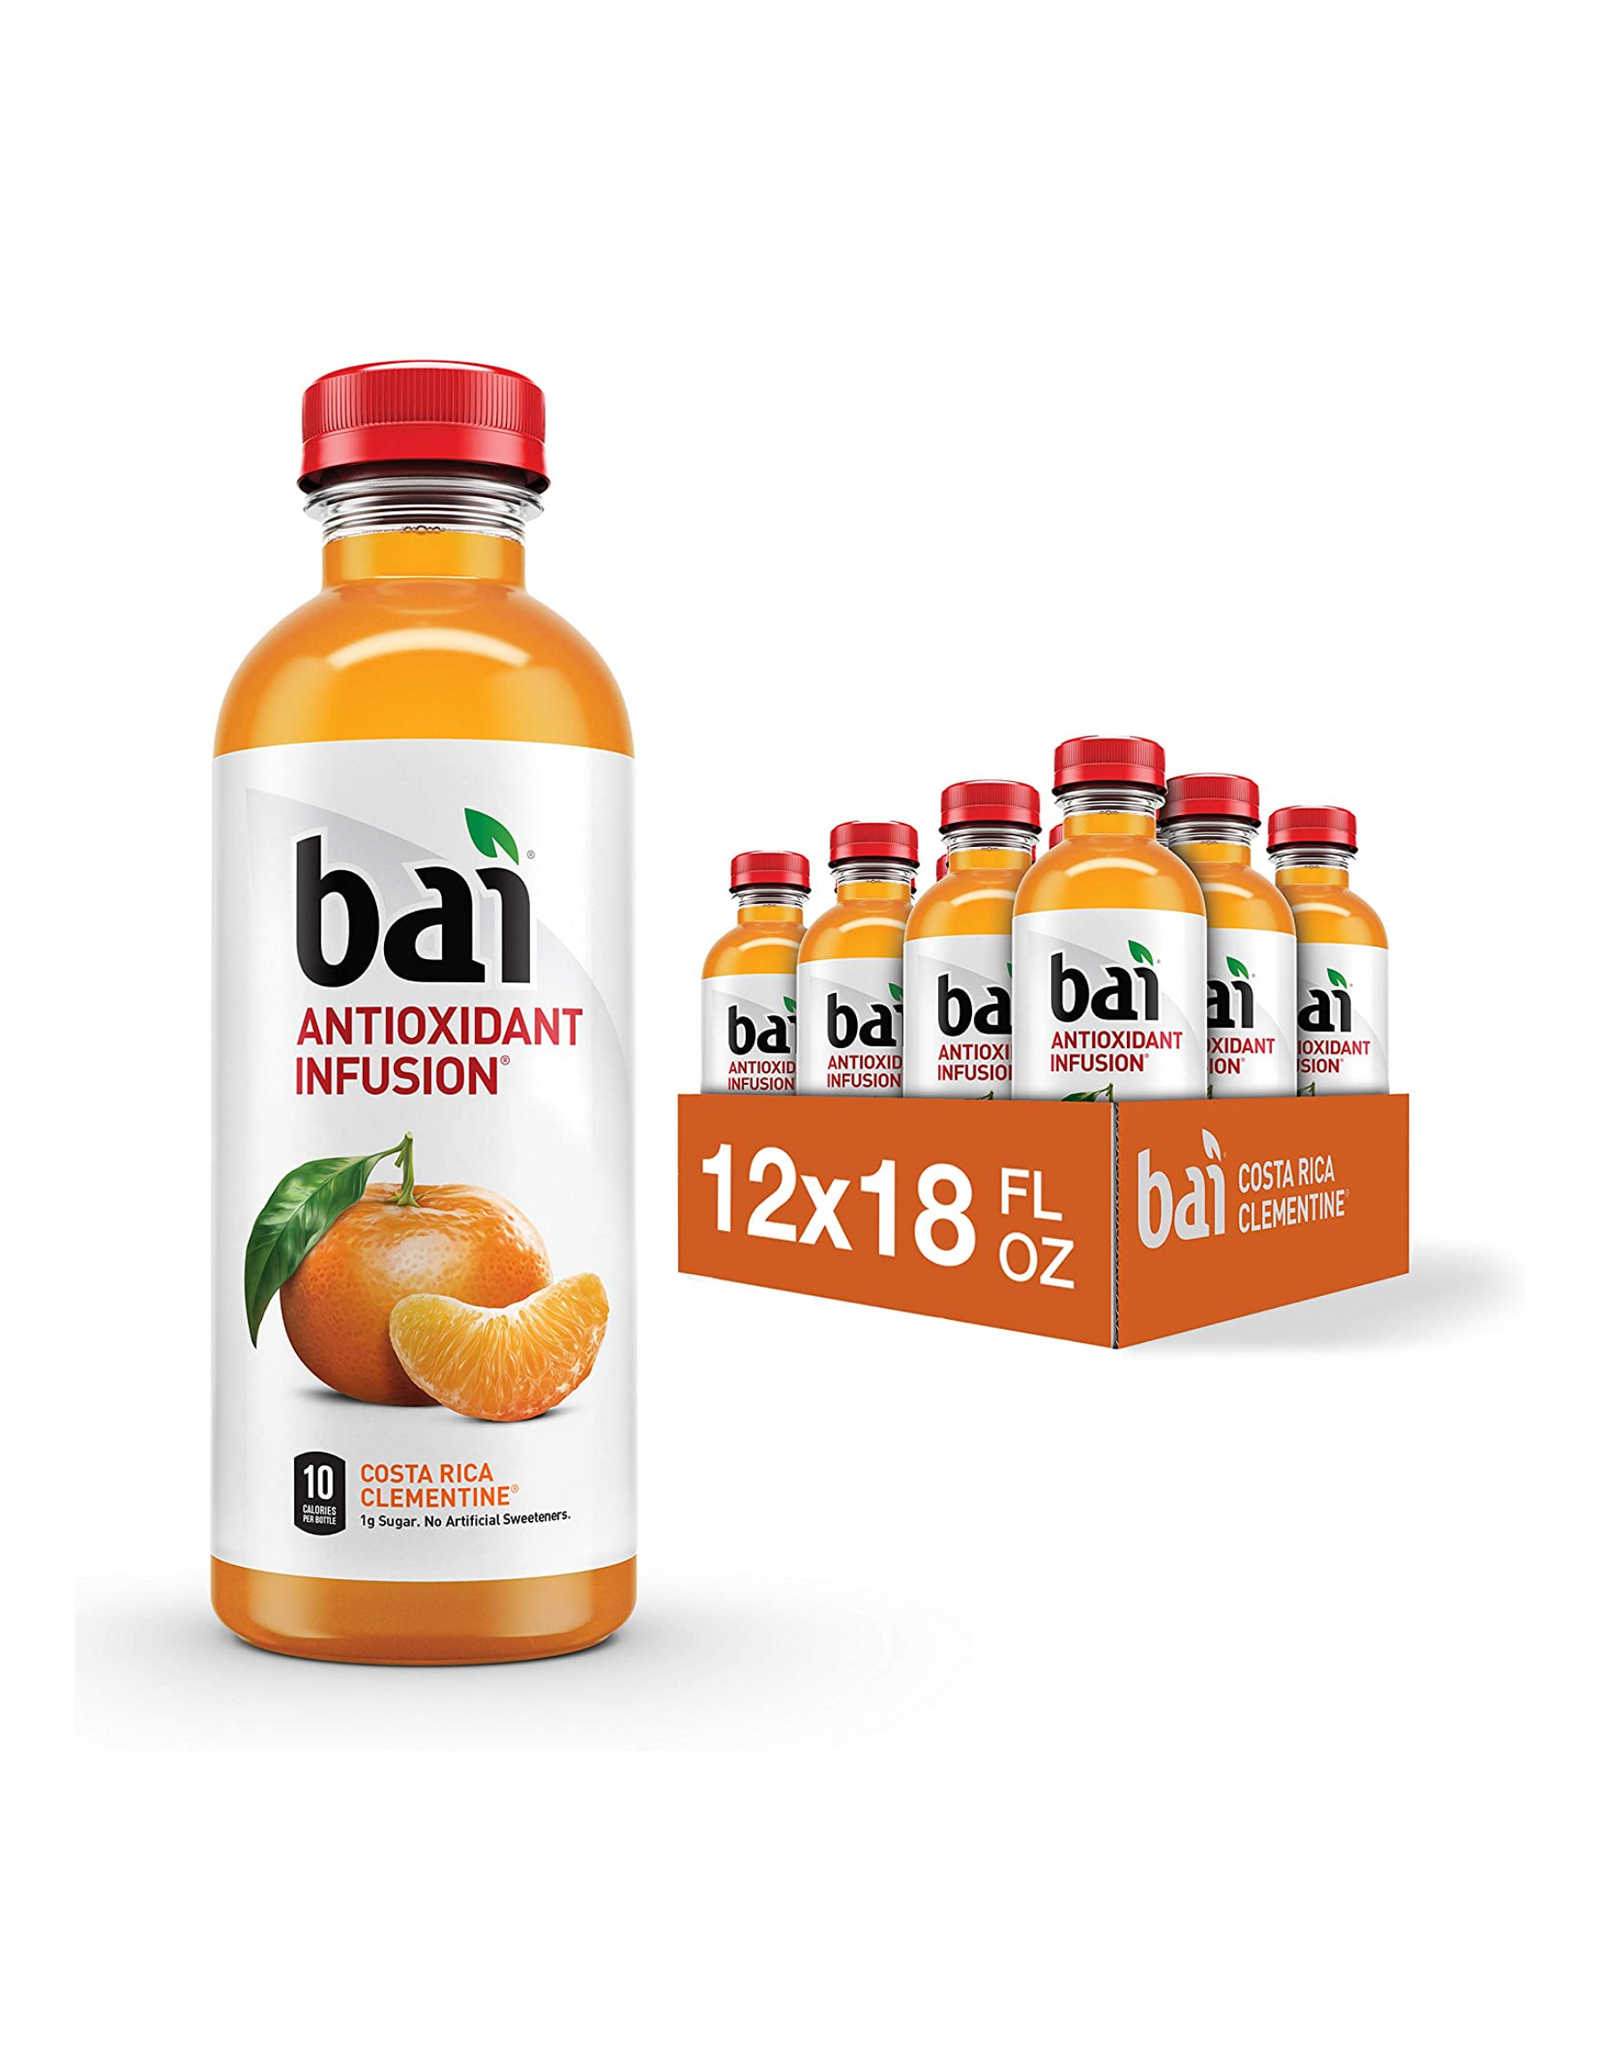 Bai Flavored Water, Antioxidant Infused Drinks, Costa Rica Clementine, 18 fl oz (Pack of 12)